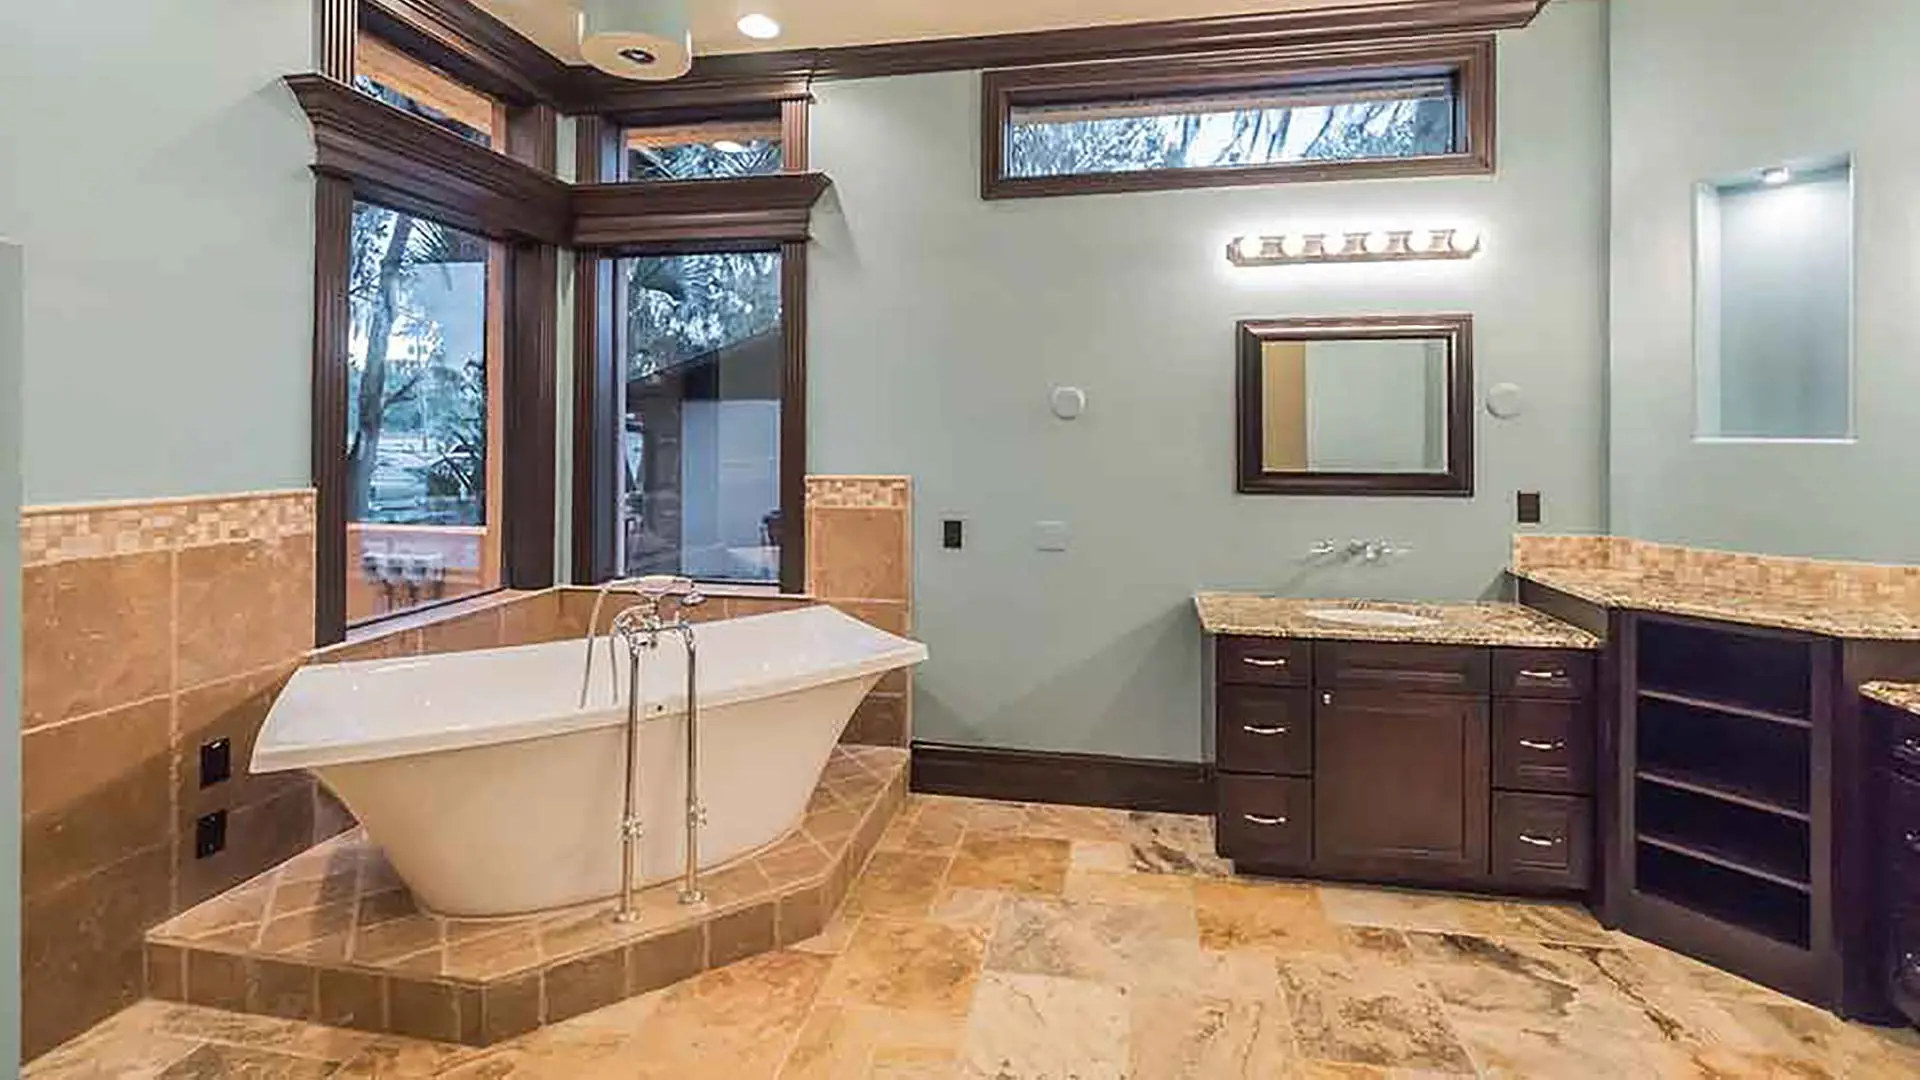 Thonotosassa, FL home with a True Builders remodeled bathroom.